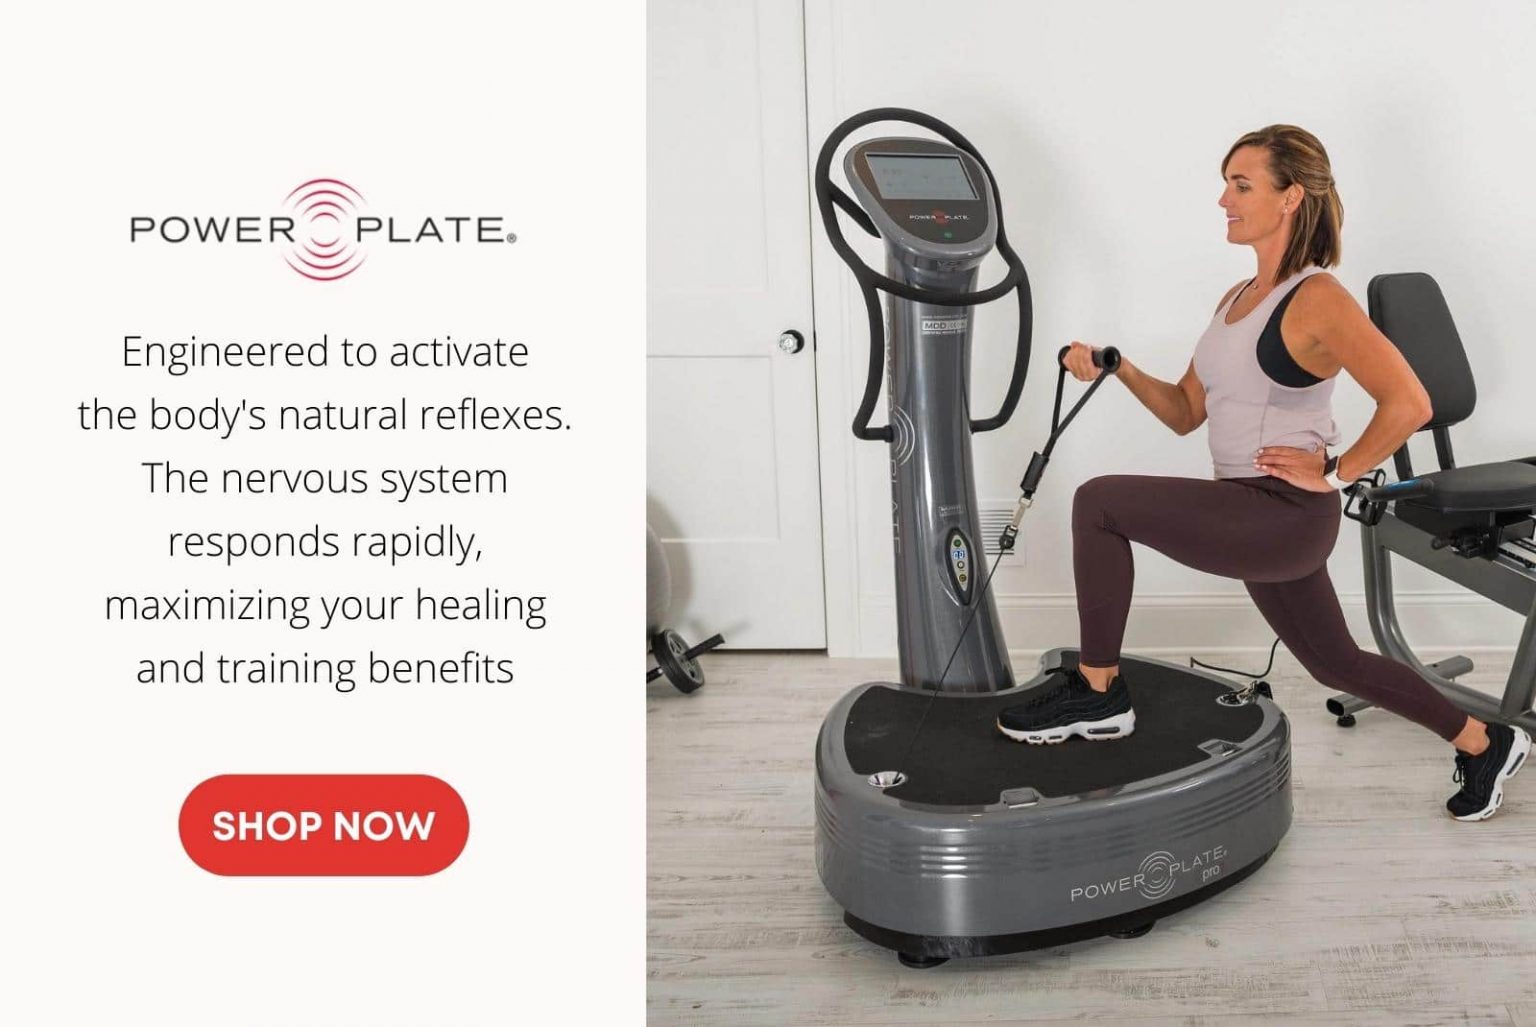 Maximize your training and health benefits with the Power Plate pro7